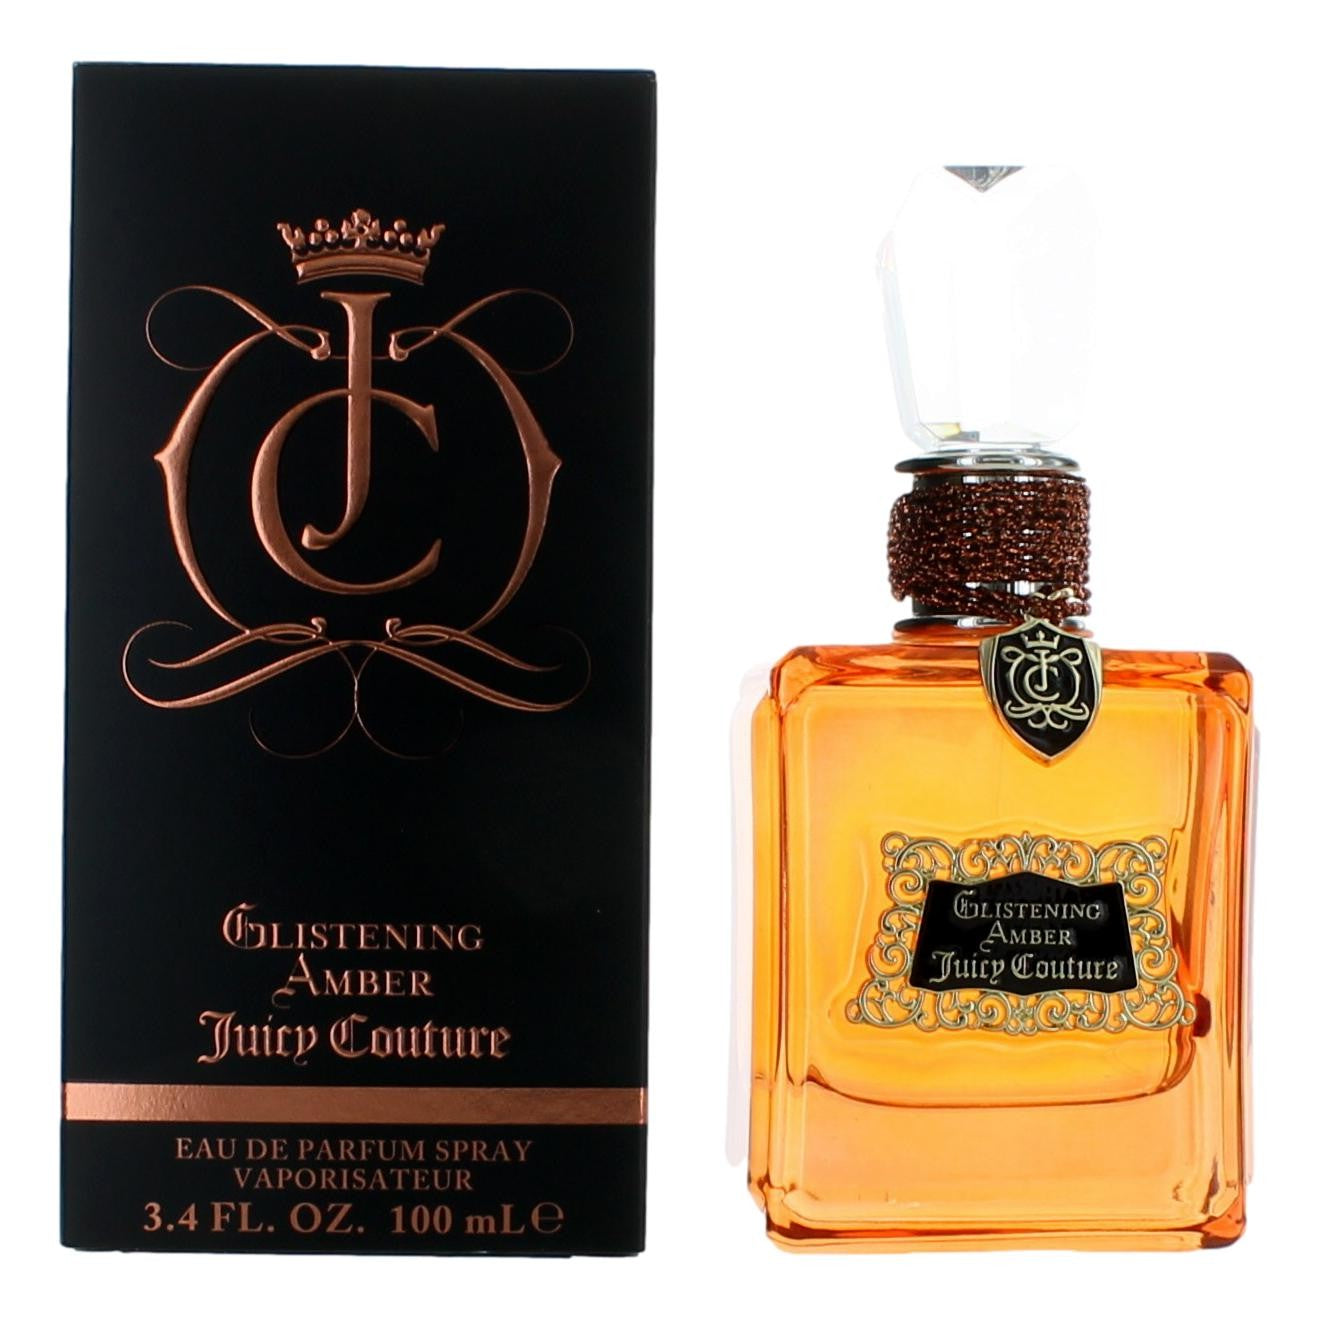 Glistening Amber by Juicy Couture